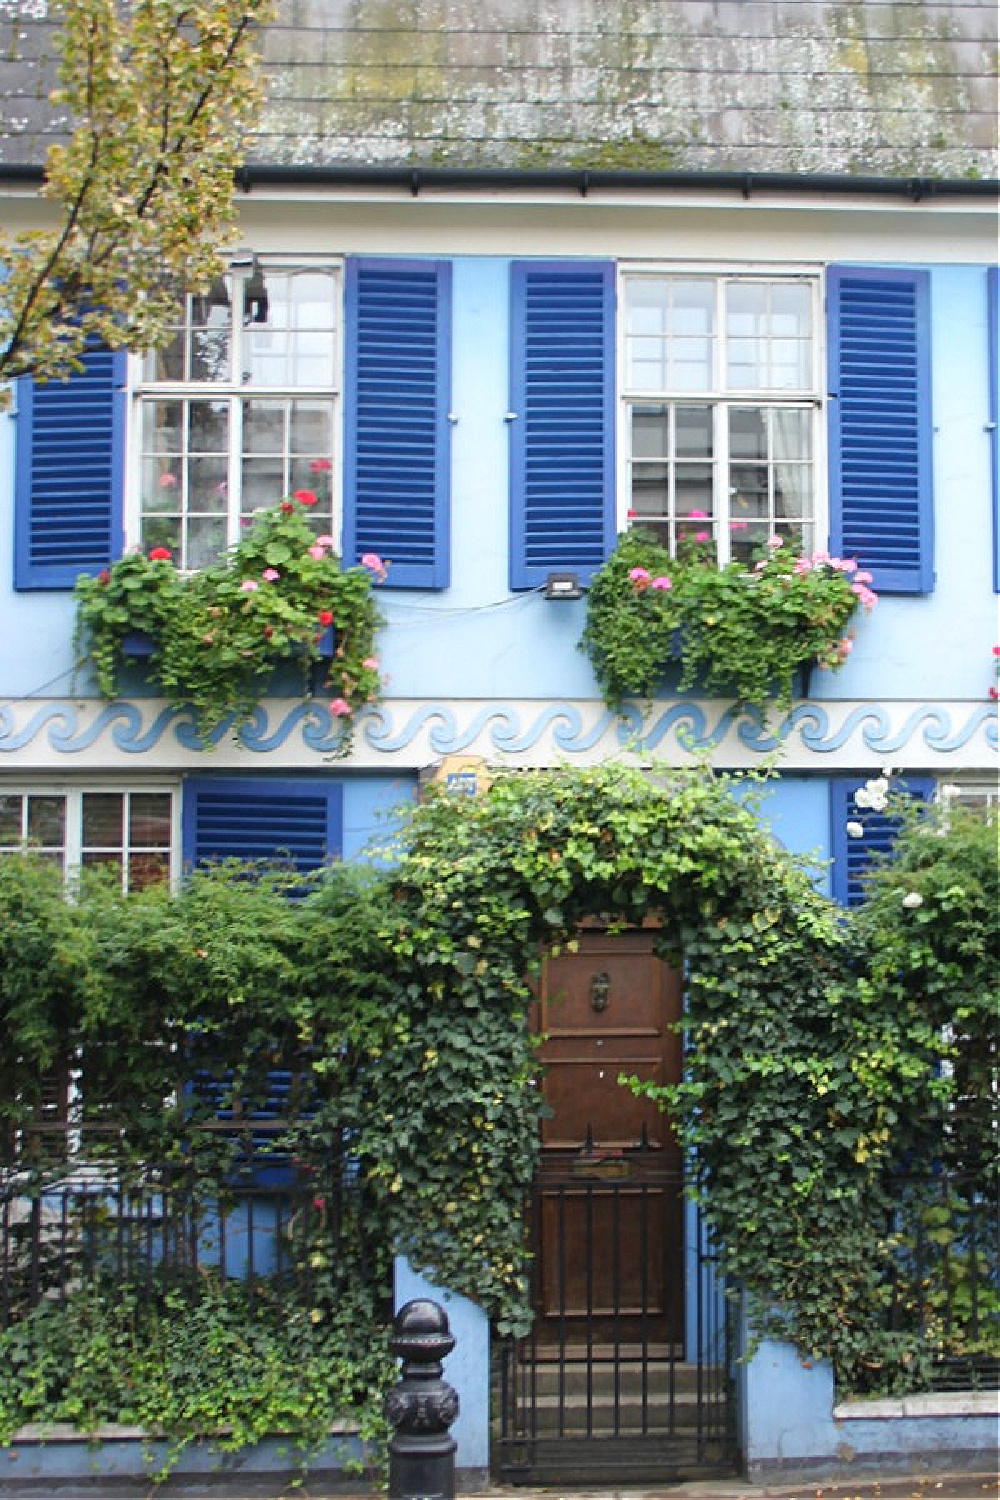 Beautiful sky blue house exterior with royal blue shutters in Notting Hill. Come explore paint colors for your front door. #frontdoorcolors #paintcolors #curbappeal